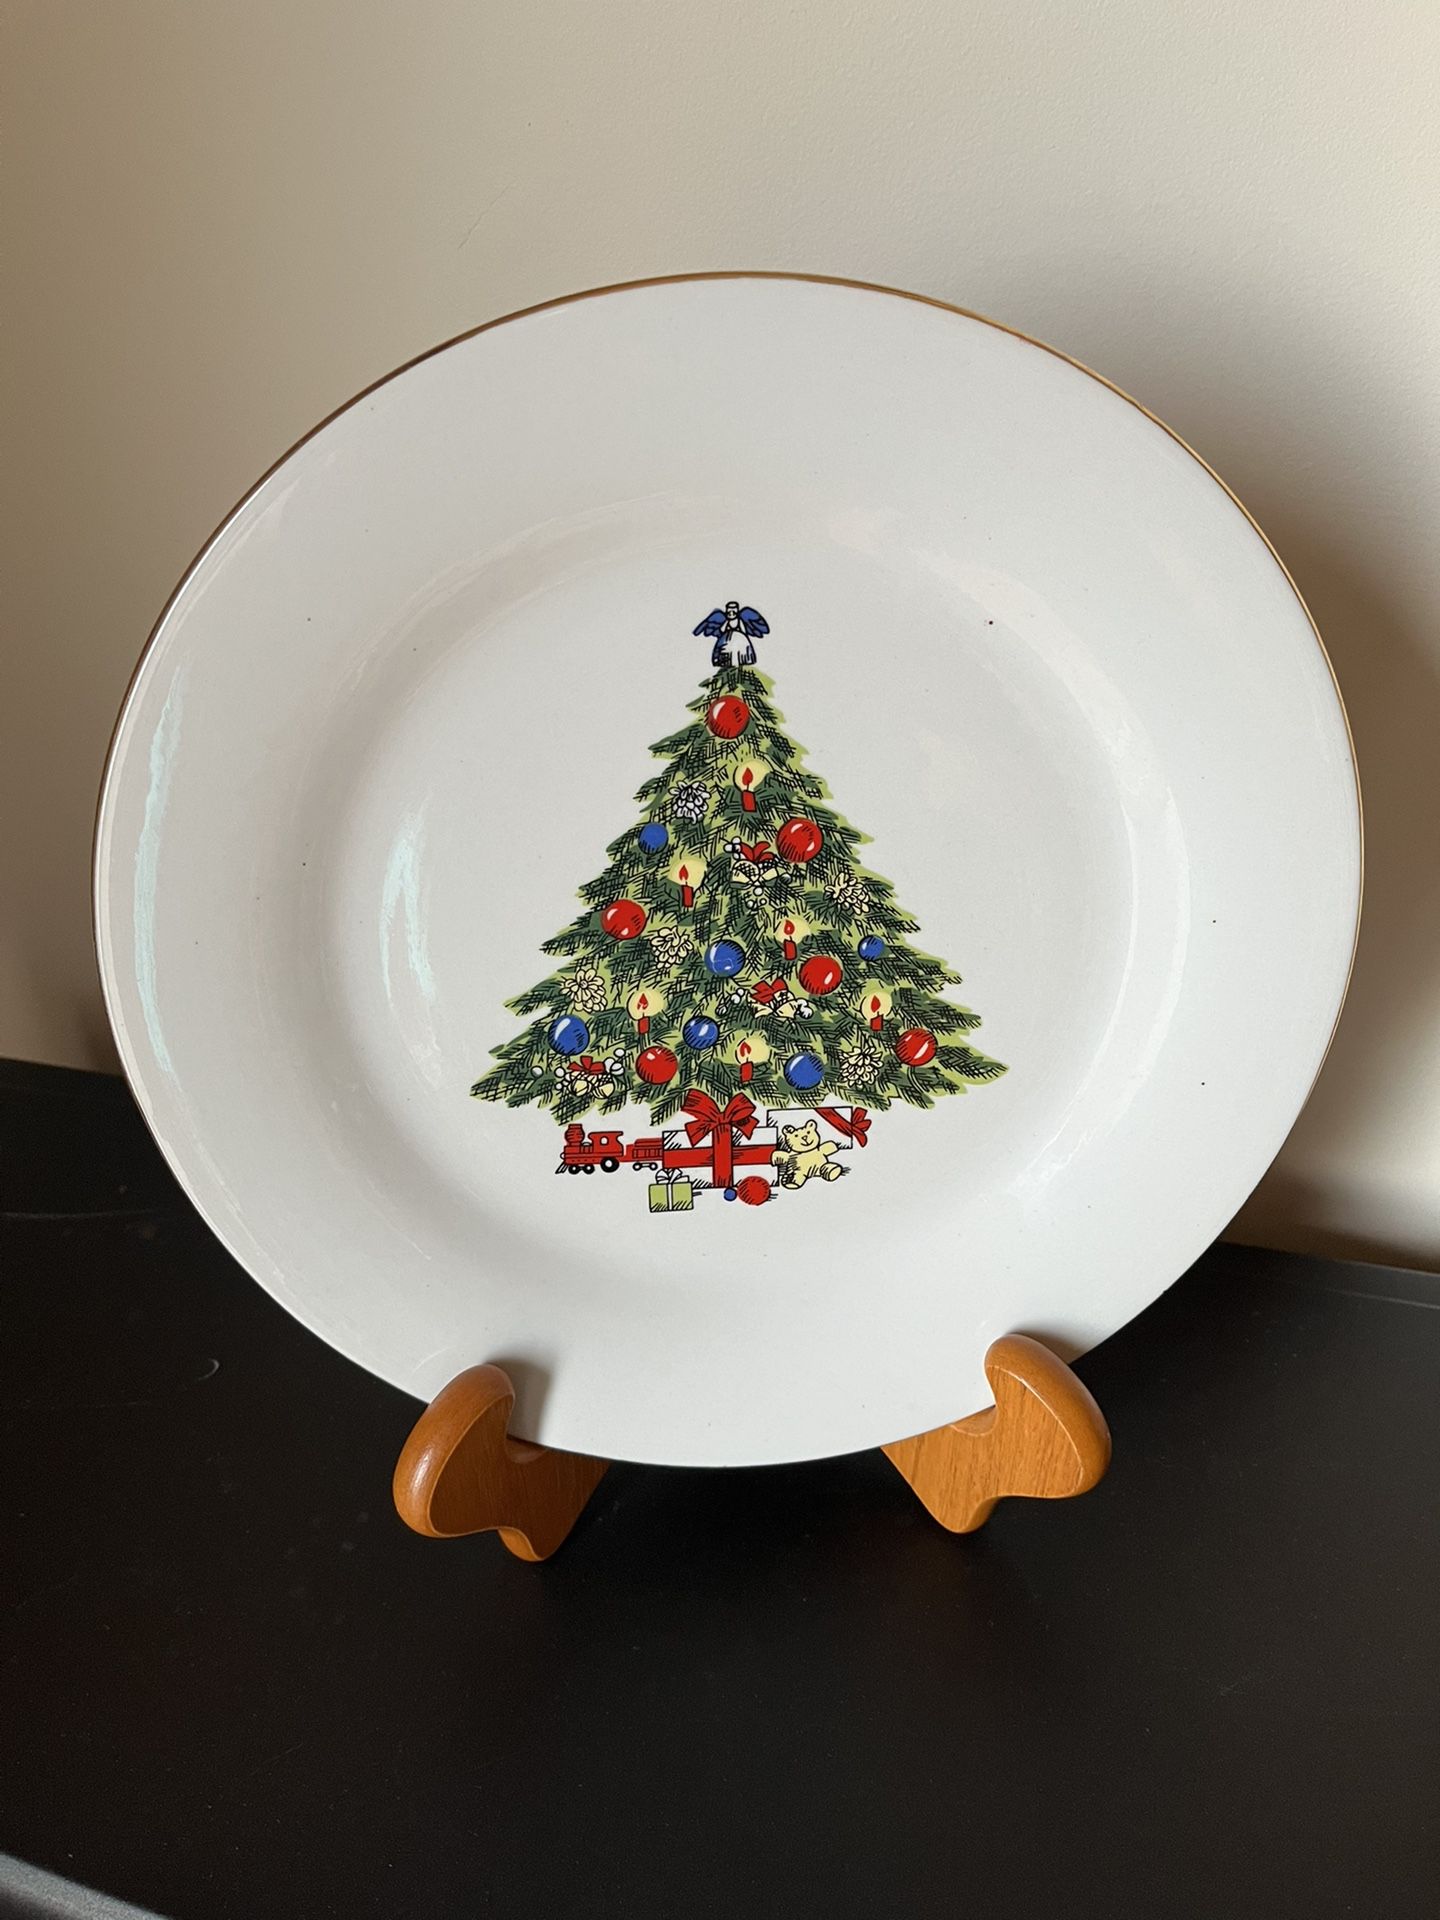 Christmas Tree Dinner Plate with Gold Rim 10.5" Sea Gull Fine China Christmas in July